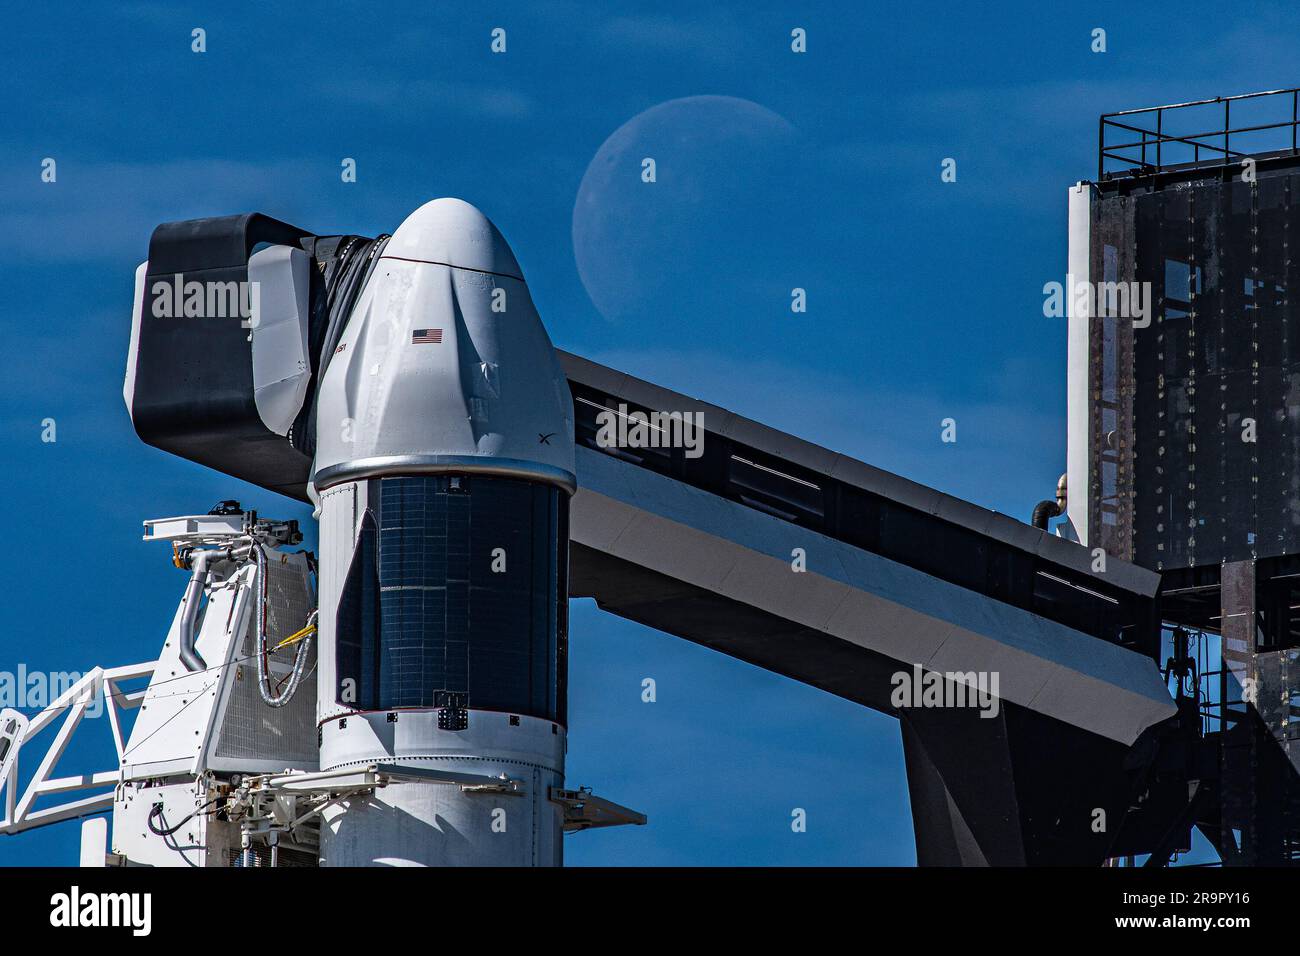 Dragon spacecraft at SpaceX headquarters, 2015 - Stock Image - C030/9058 -  Science Photo Library